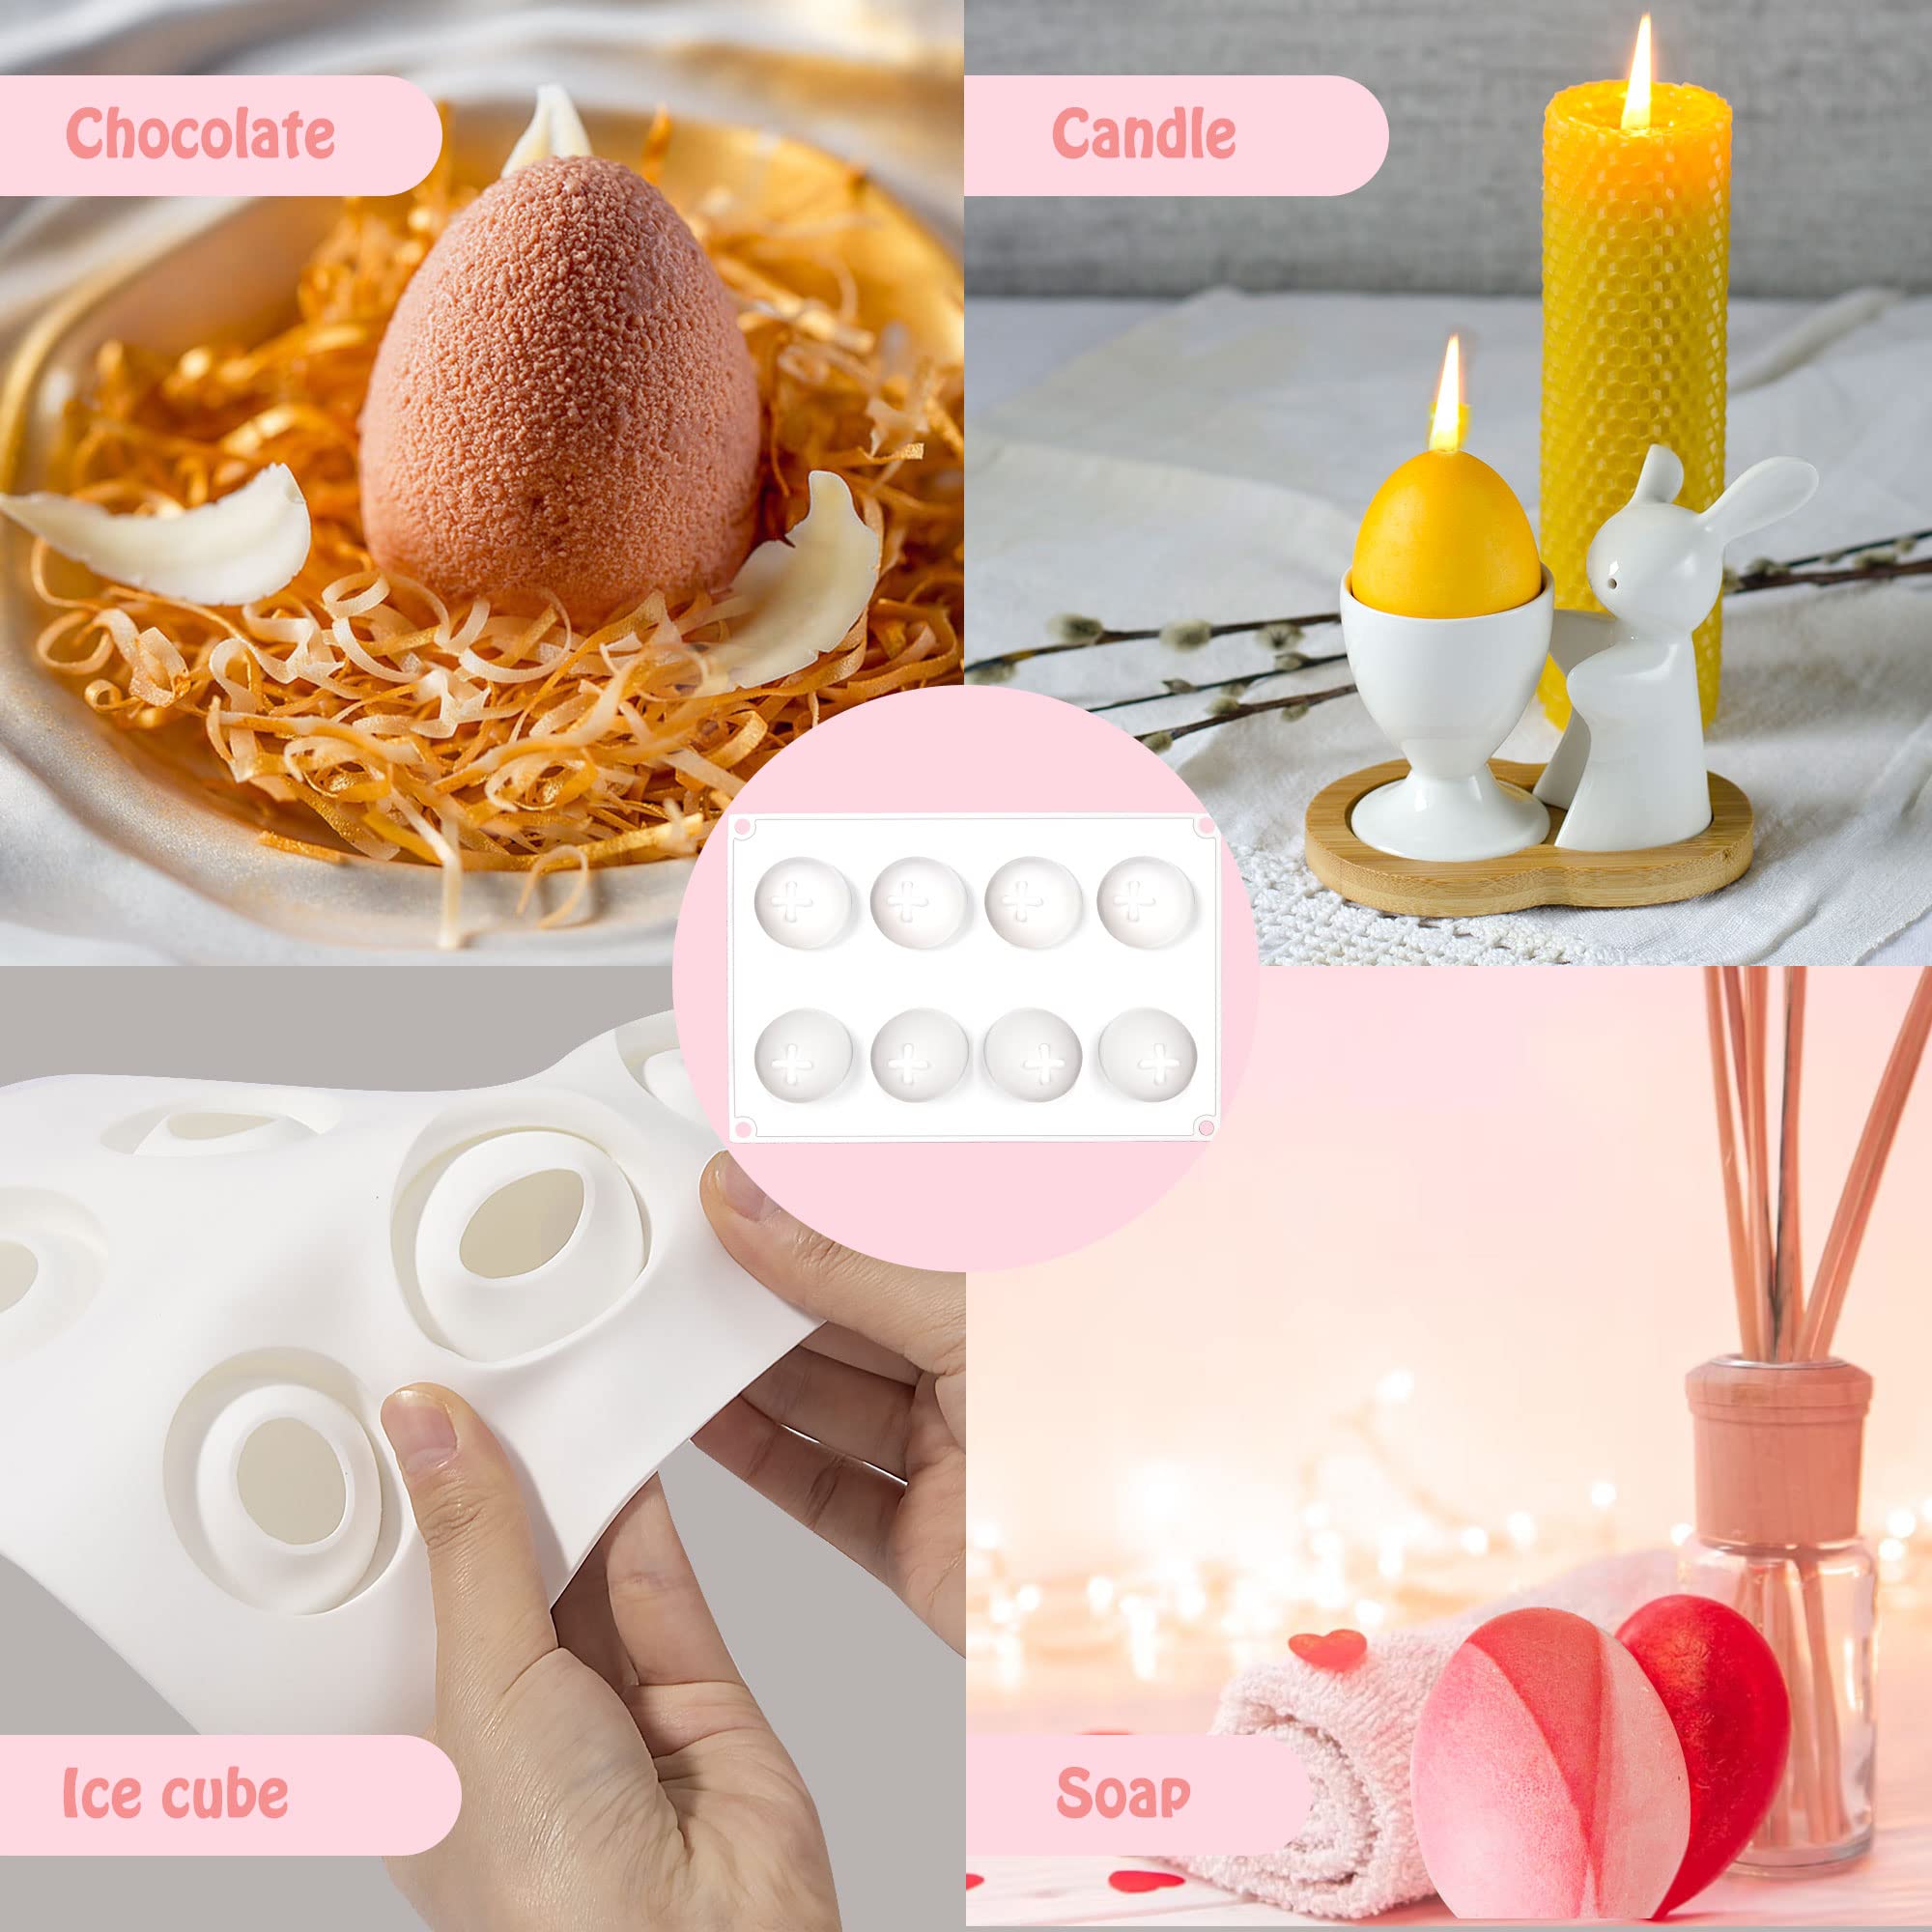 ONNPNN 8 Cavity Easter Egg Silicone Mold, Egg Shape Chocolate Candy Fondant Molds, 3D Food Shape French Dessert Moulds, Creative Easter Eggs Ice Cube Baking Tray for Soap Resin Lotion Bar